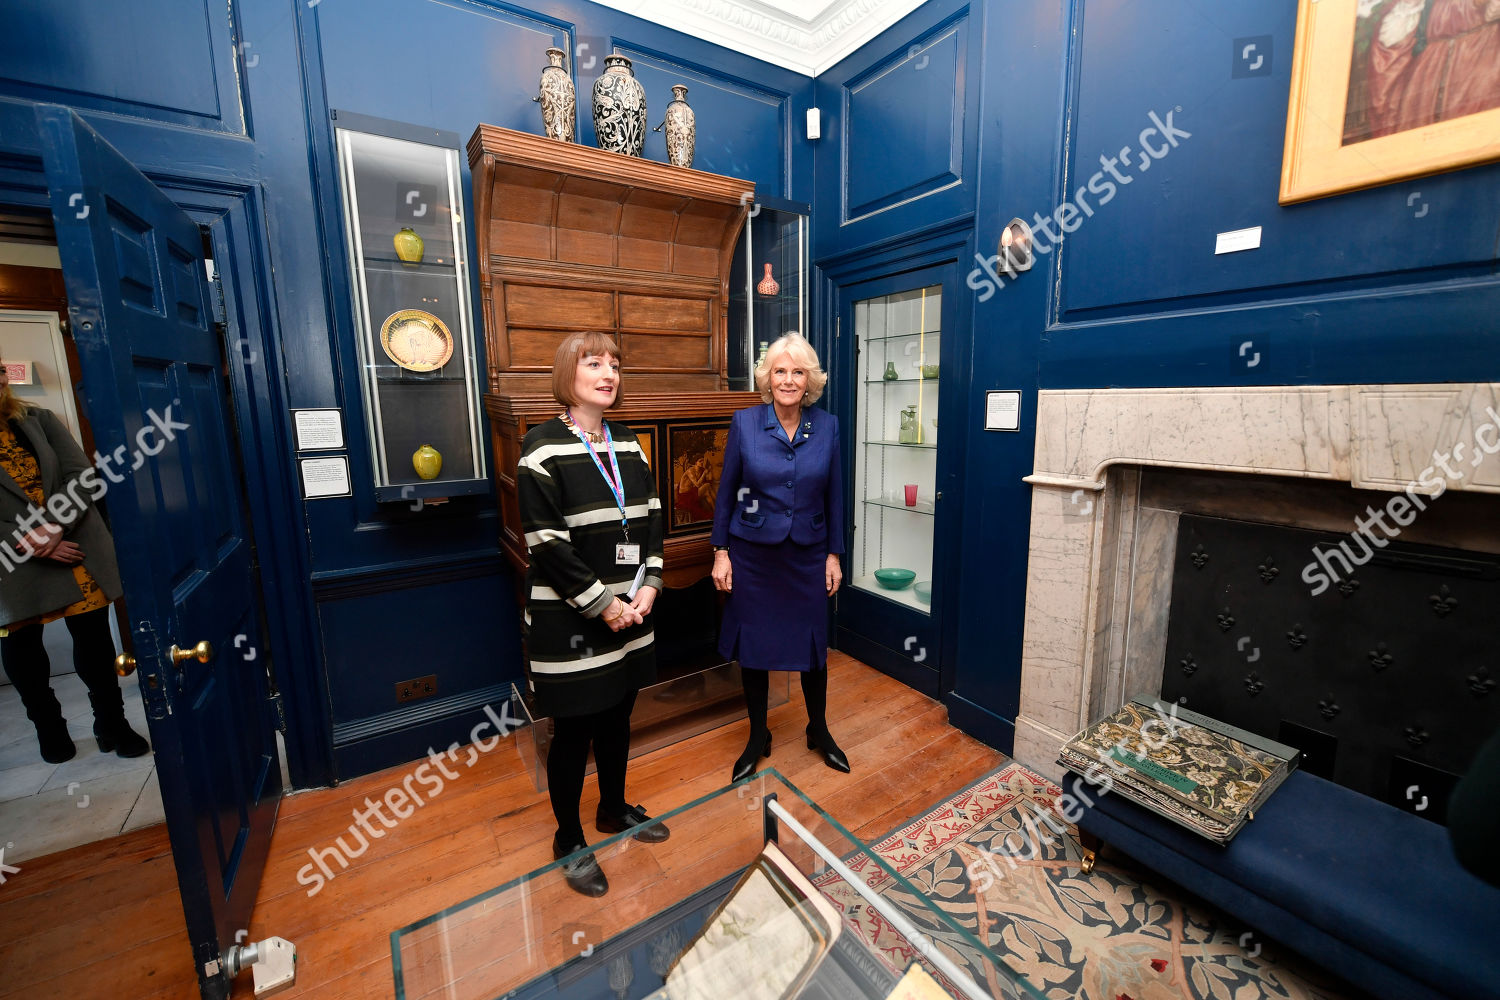 camilla-duchess-of-cornwall-visit-to-the-william-morris-gallery-london-uk-shutterstock-editorial-10114356d.jpg